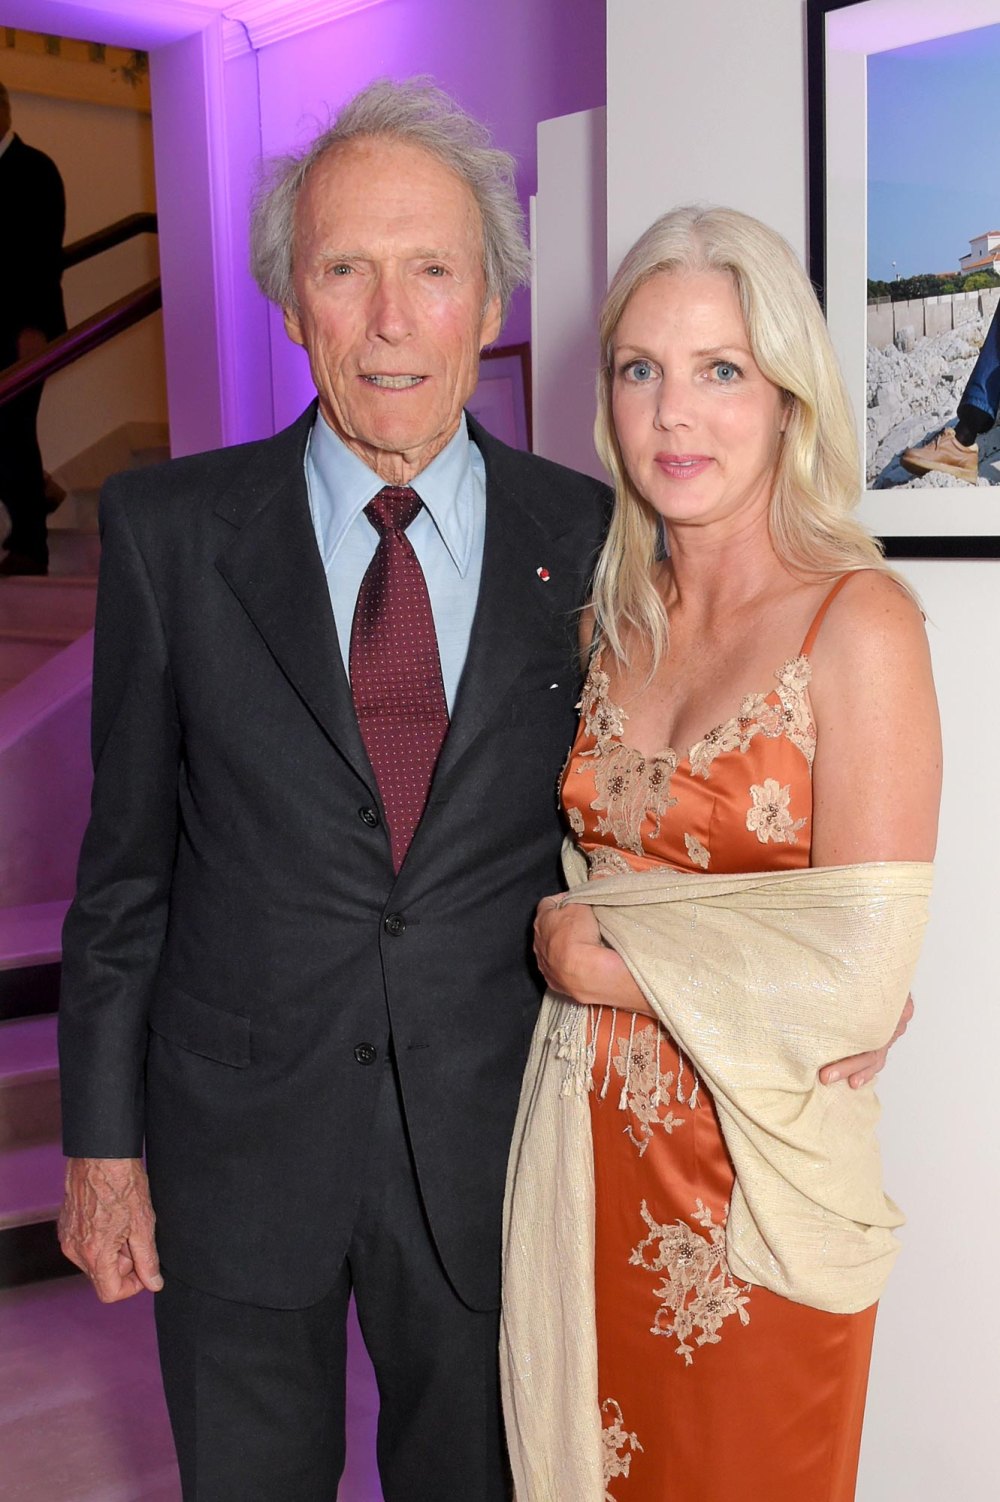 Cause of death of Clint Eastwood's long-time partner Christina Sandera announced 139